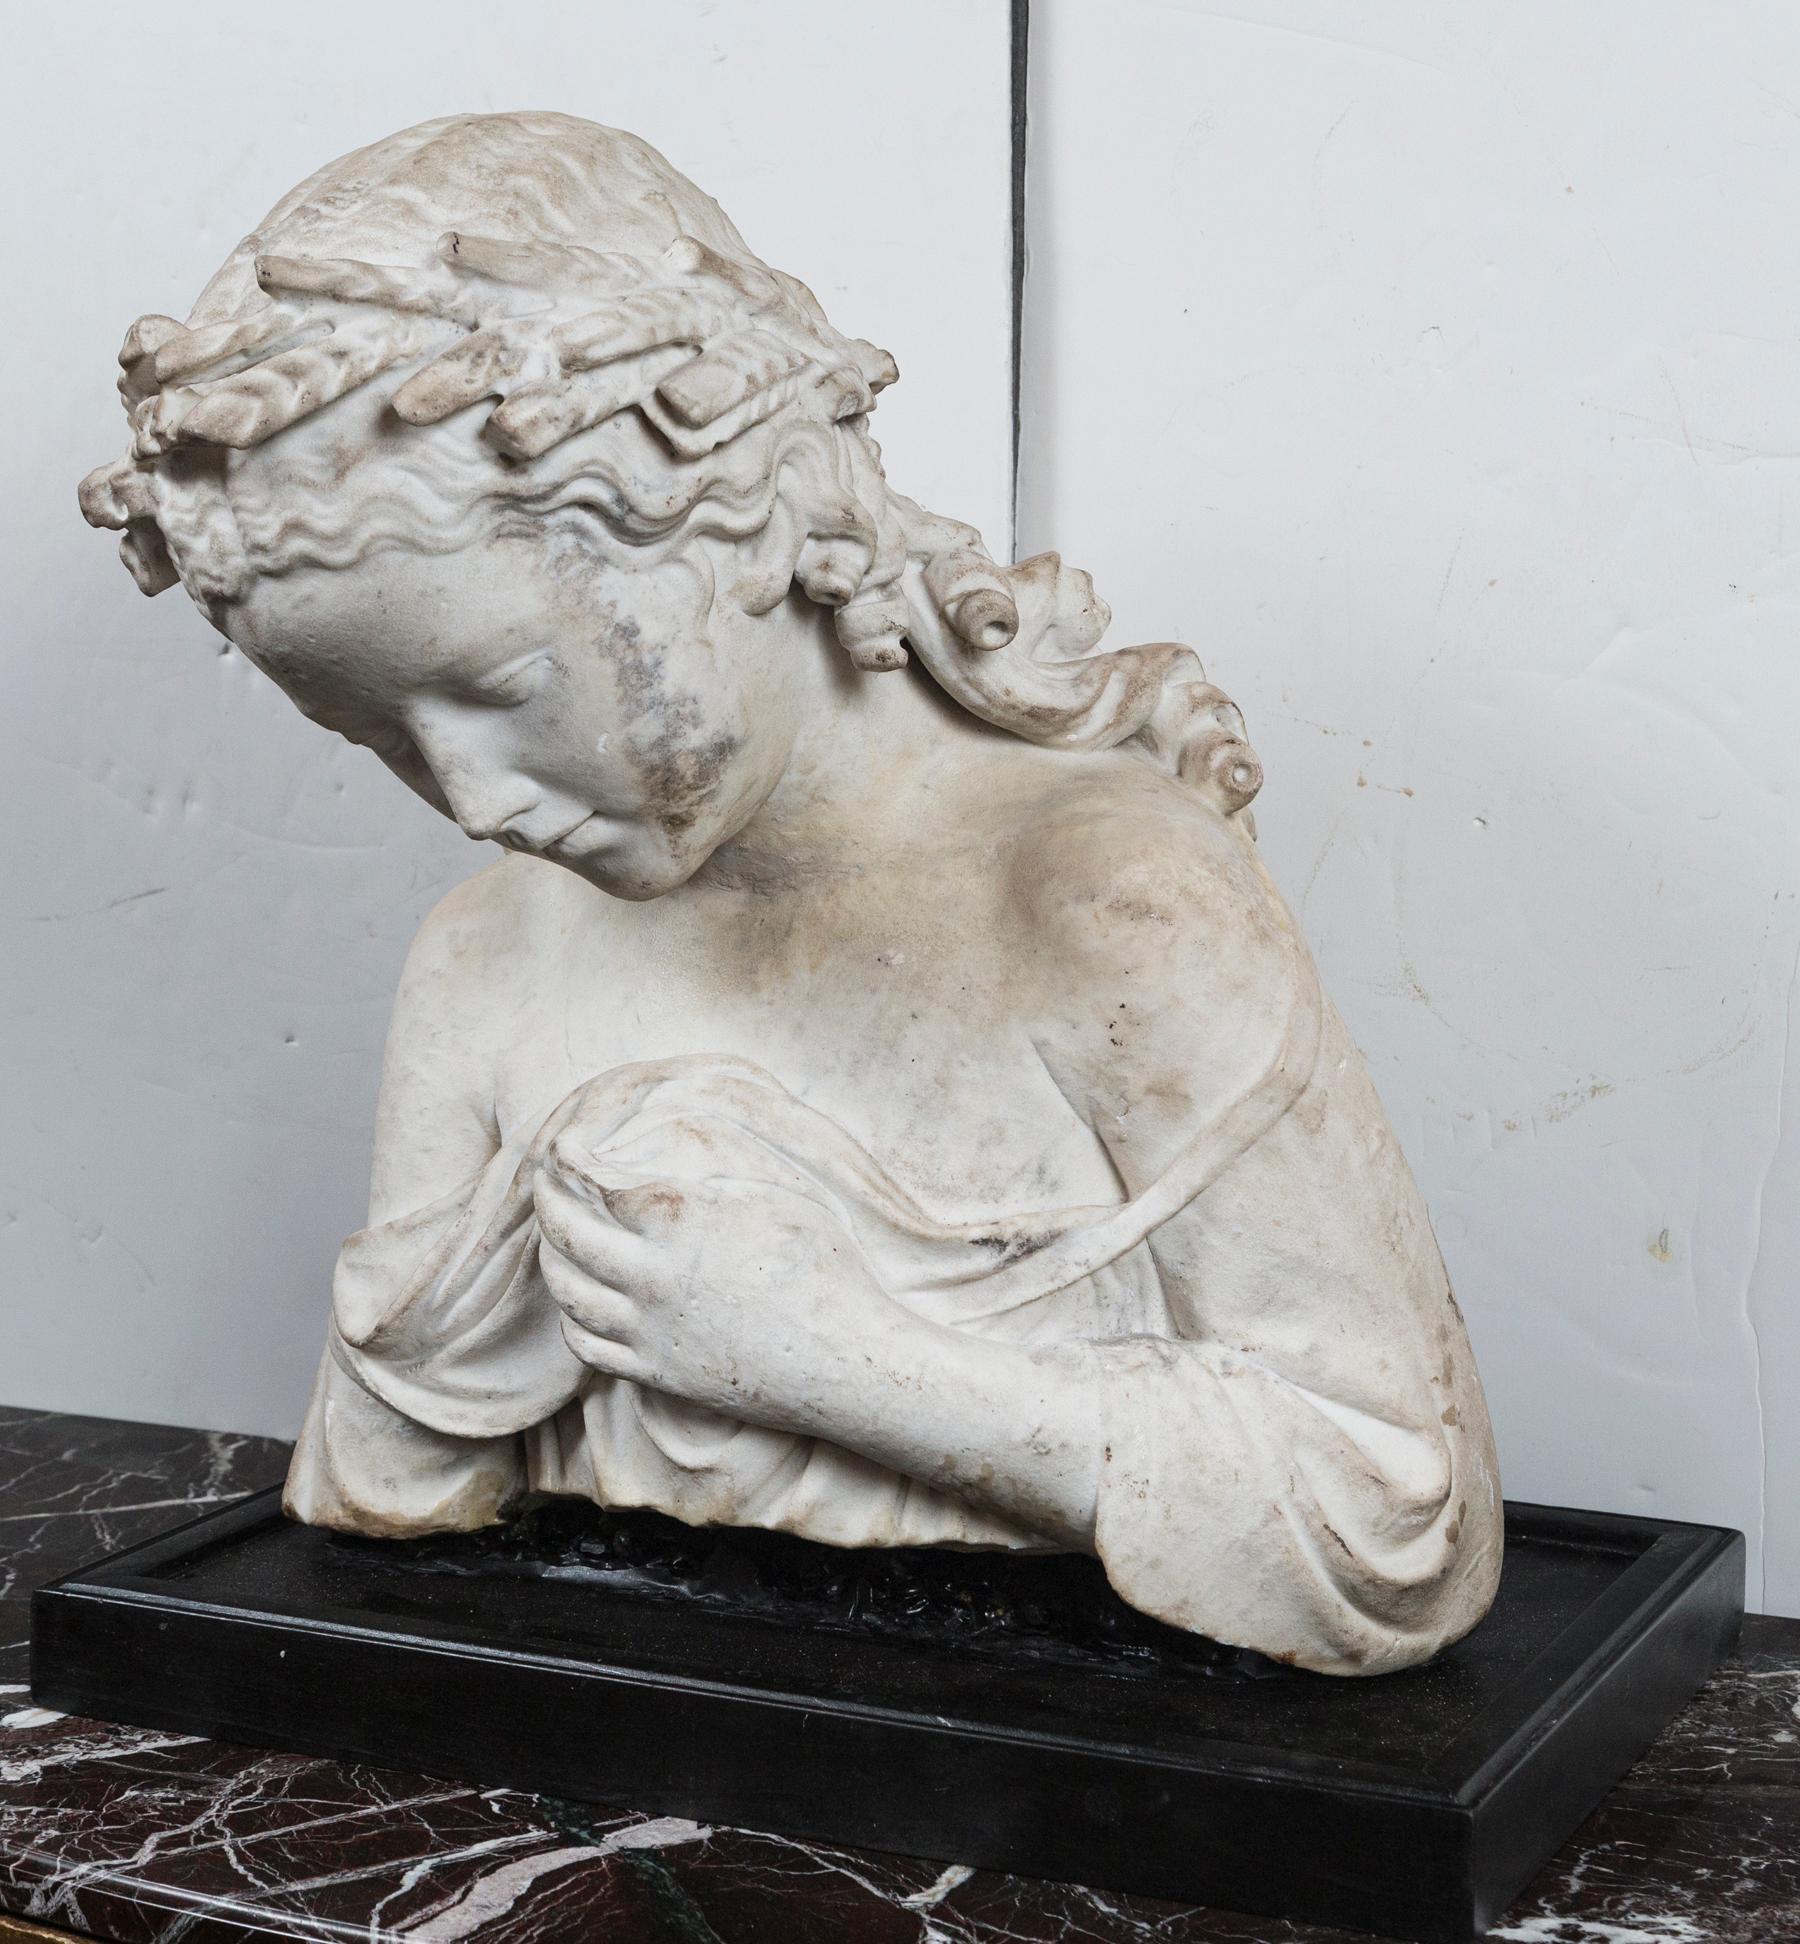 This bust is a fragment of a full figure marble statue of a woman. A modern base has been made for it.
She wears classical garb. Her left hand seems to be holding up the garment over her breast. Her right arm is missing. Her head bent forward which